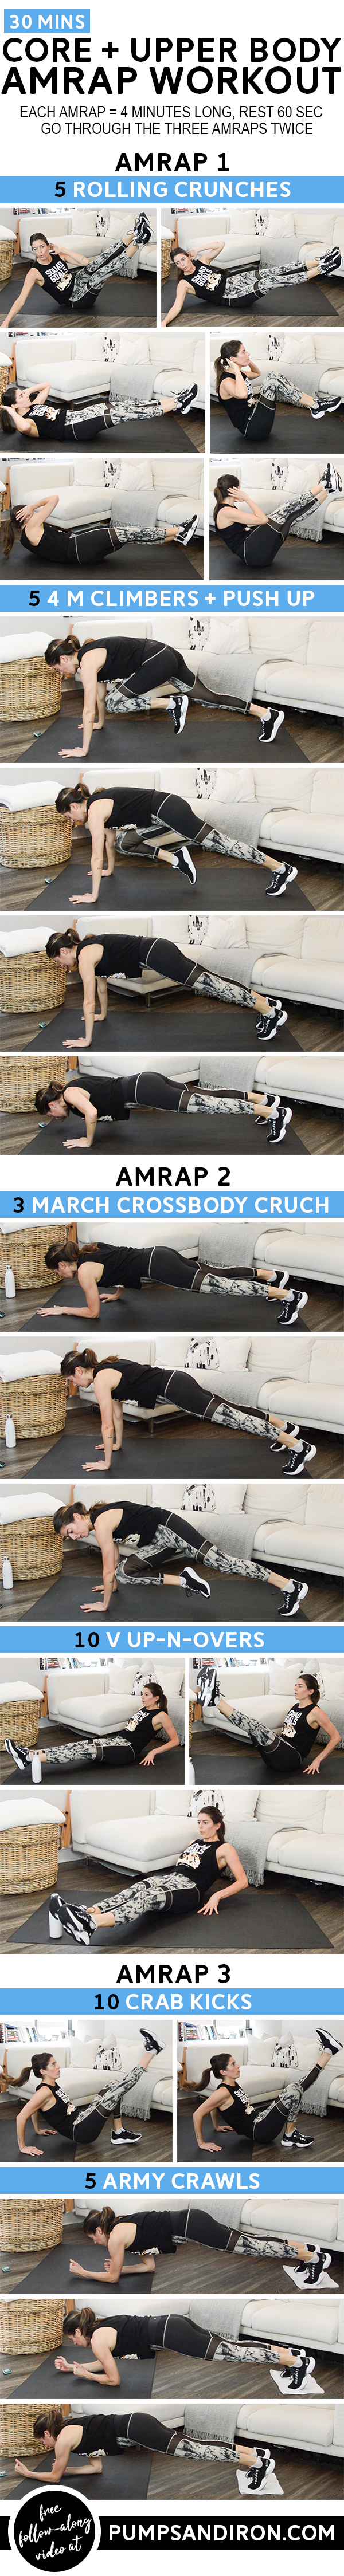 Core + Upper Body AMRAP Workout - This bodyweight workout is broken up into three 4-minute AMRAPs that target your upper body and core. #amrapworkout #workoutvideo #athomeworkout #coreworkout